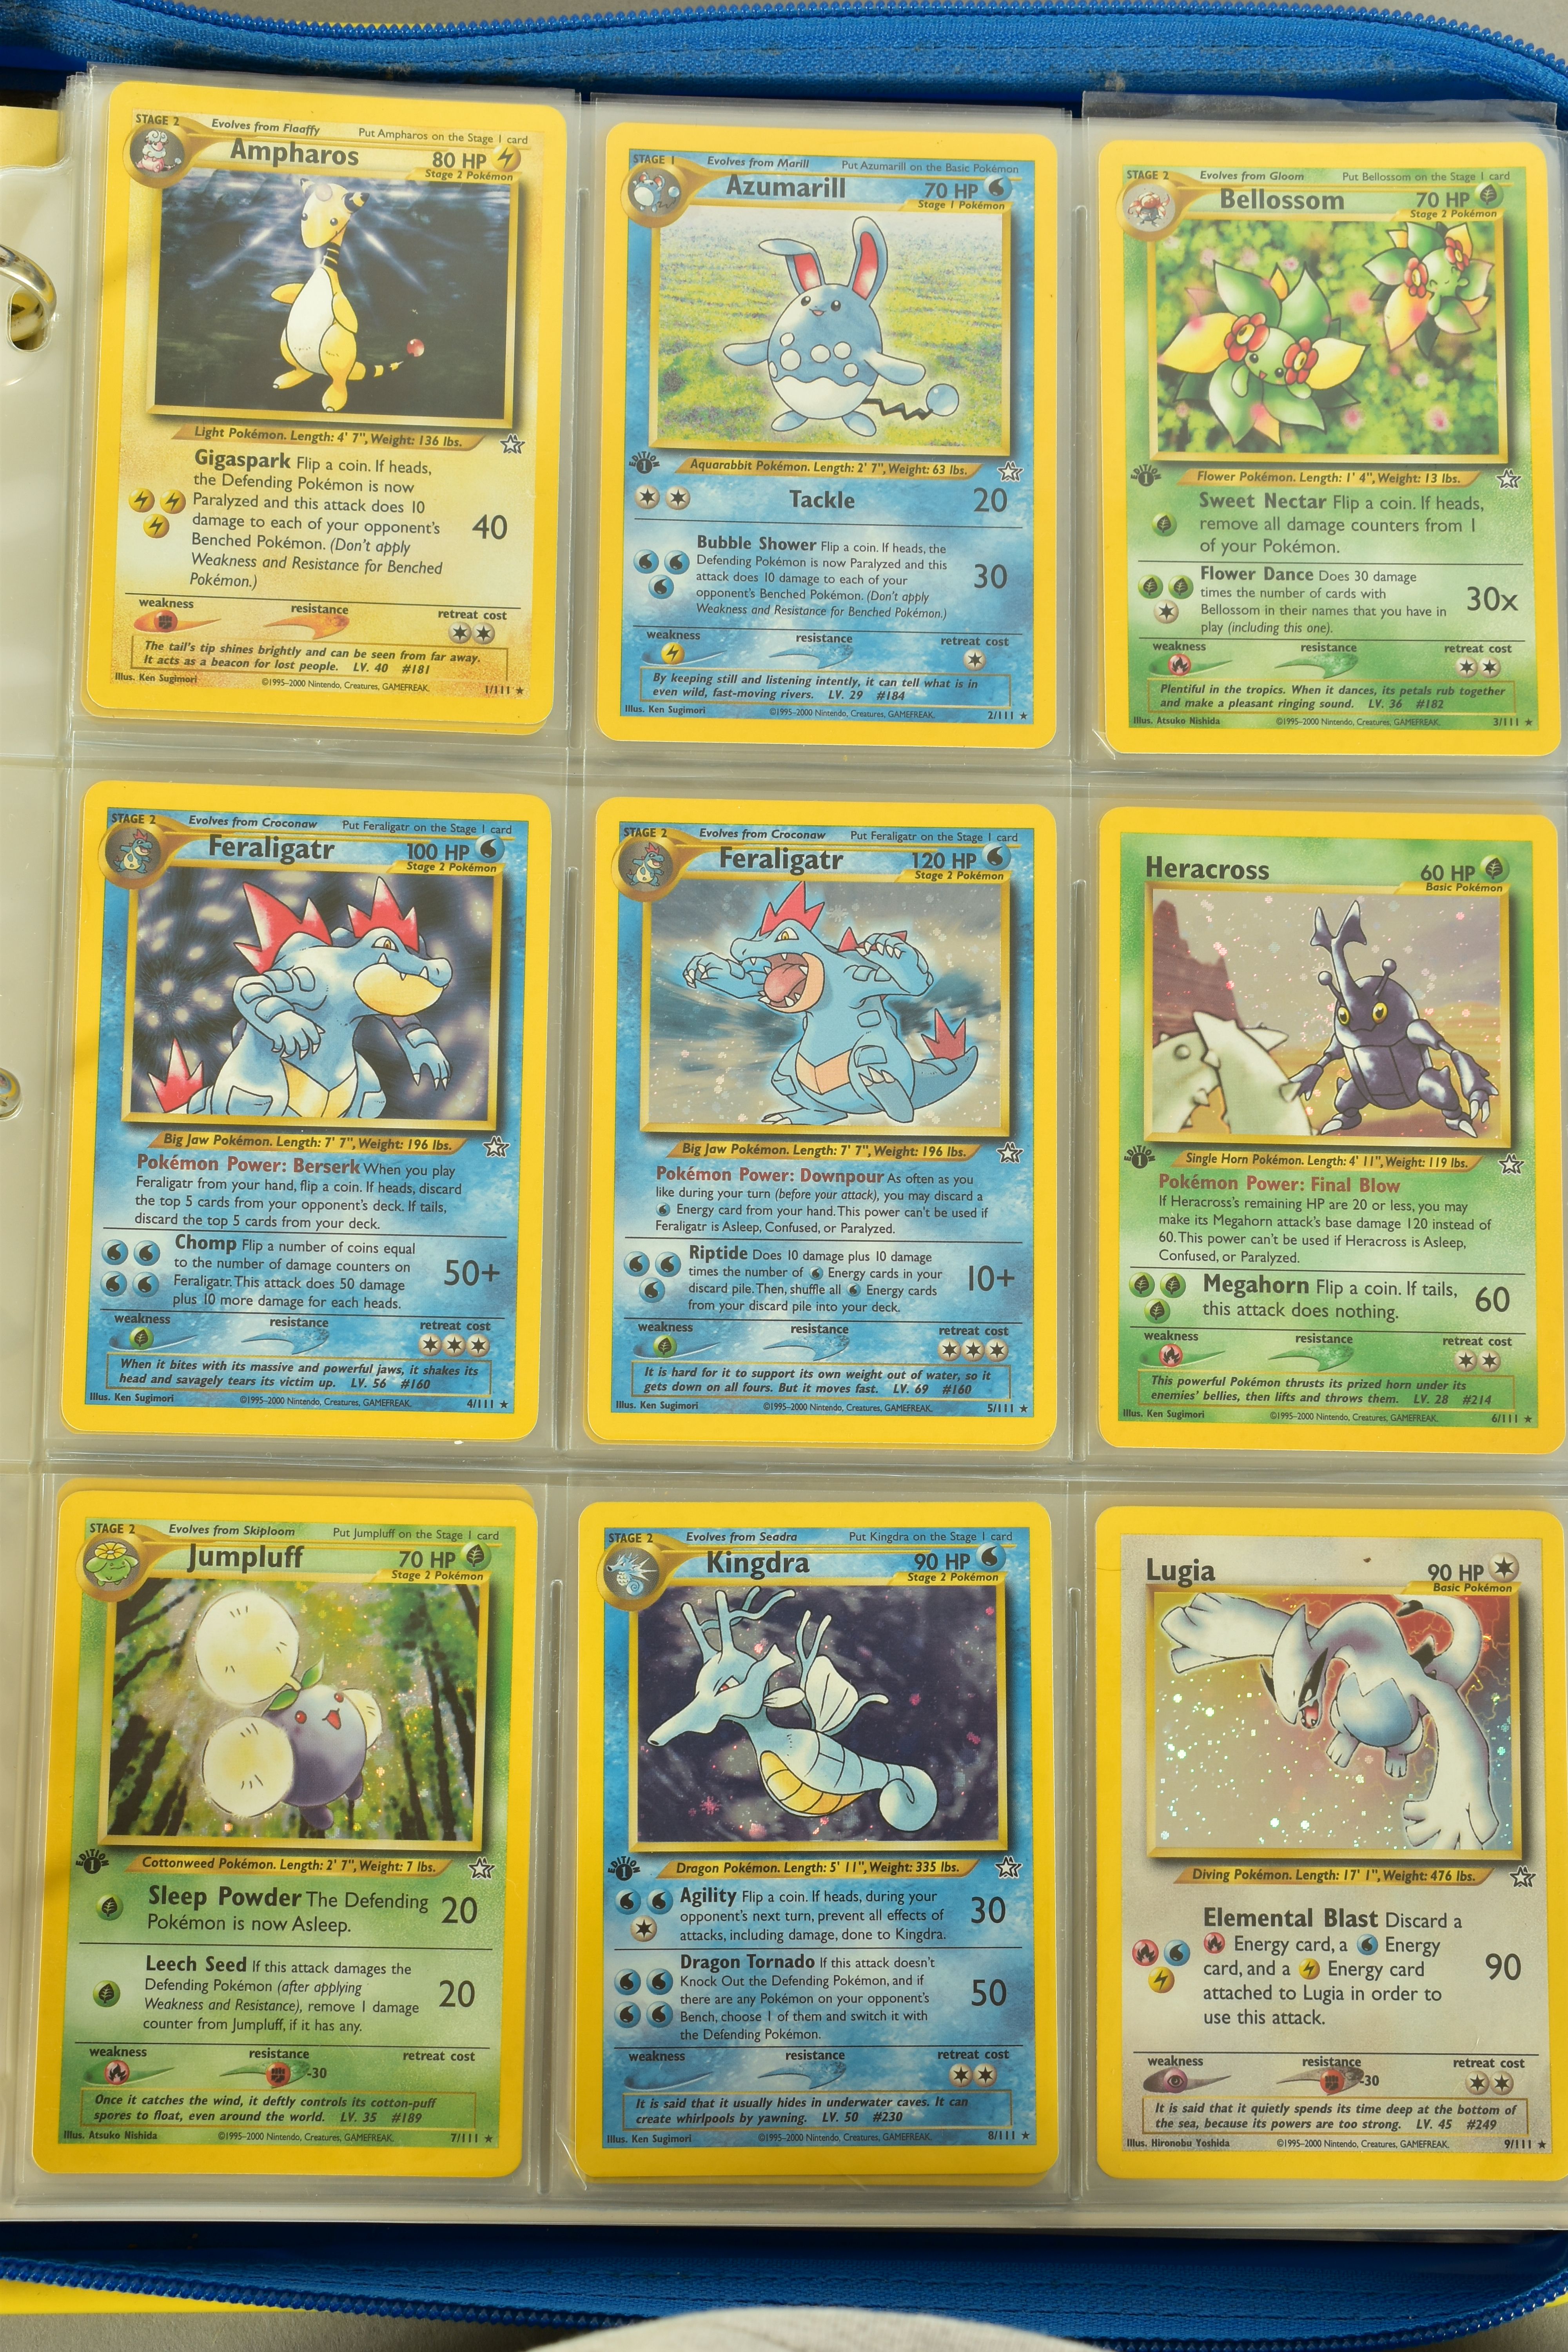 THE COMPLETE POKEMON CARD NEO GENESIS AND NEO DISCOVERY SETS, containing many first edition cards.